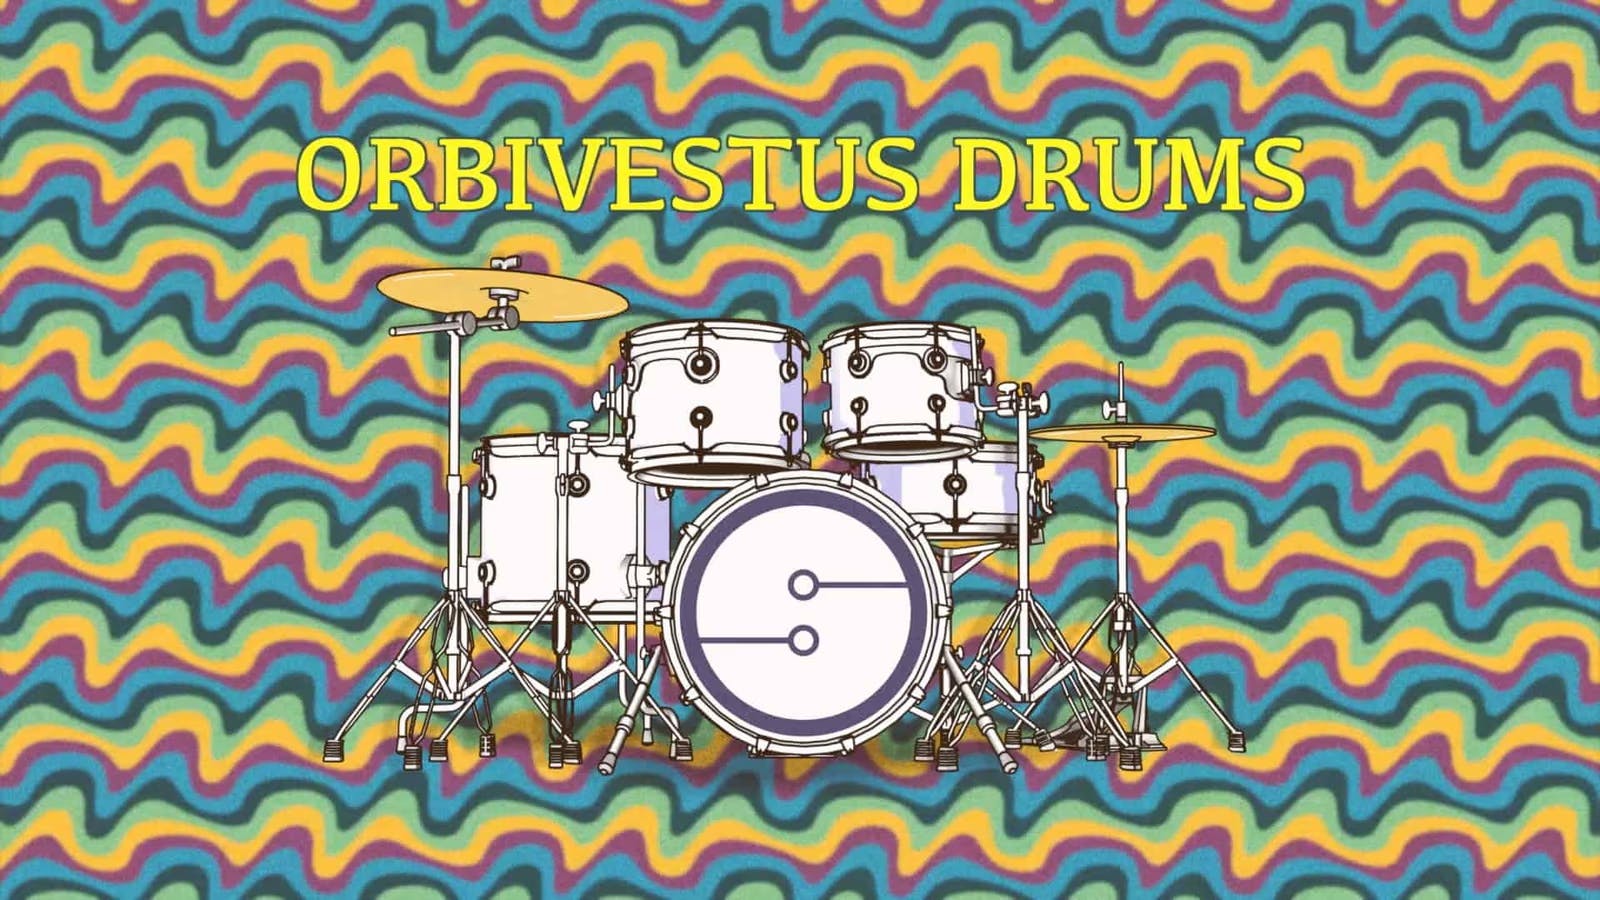 An image of a drumset in front of a trippy 70s-style background